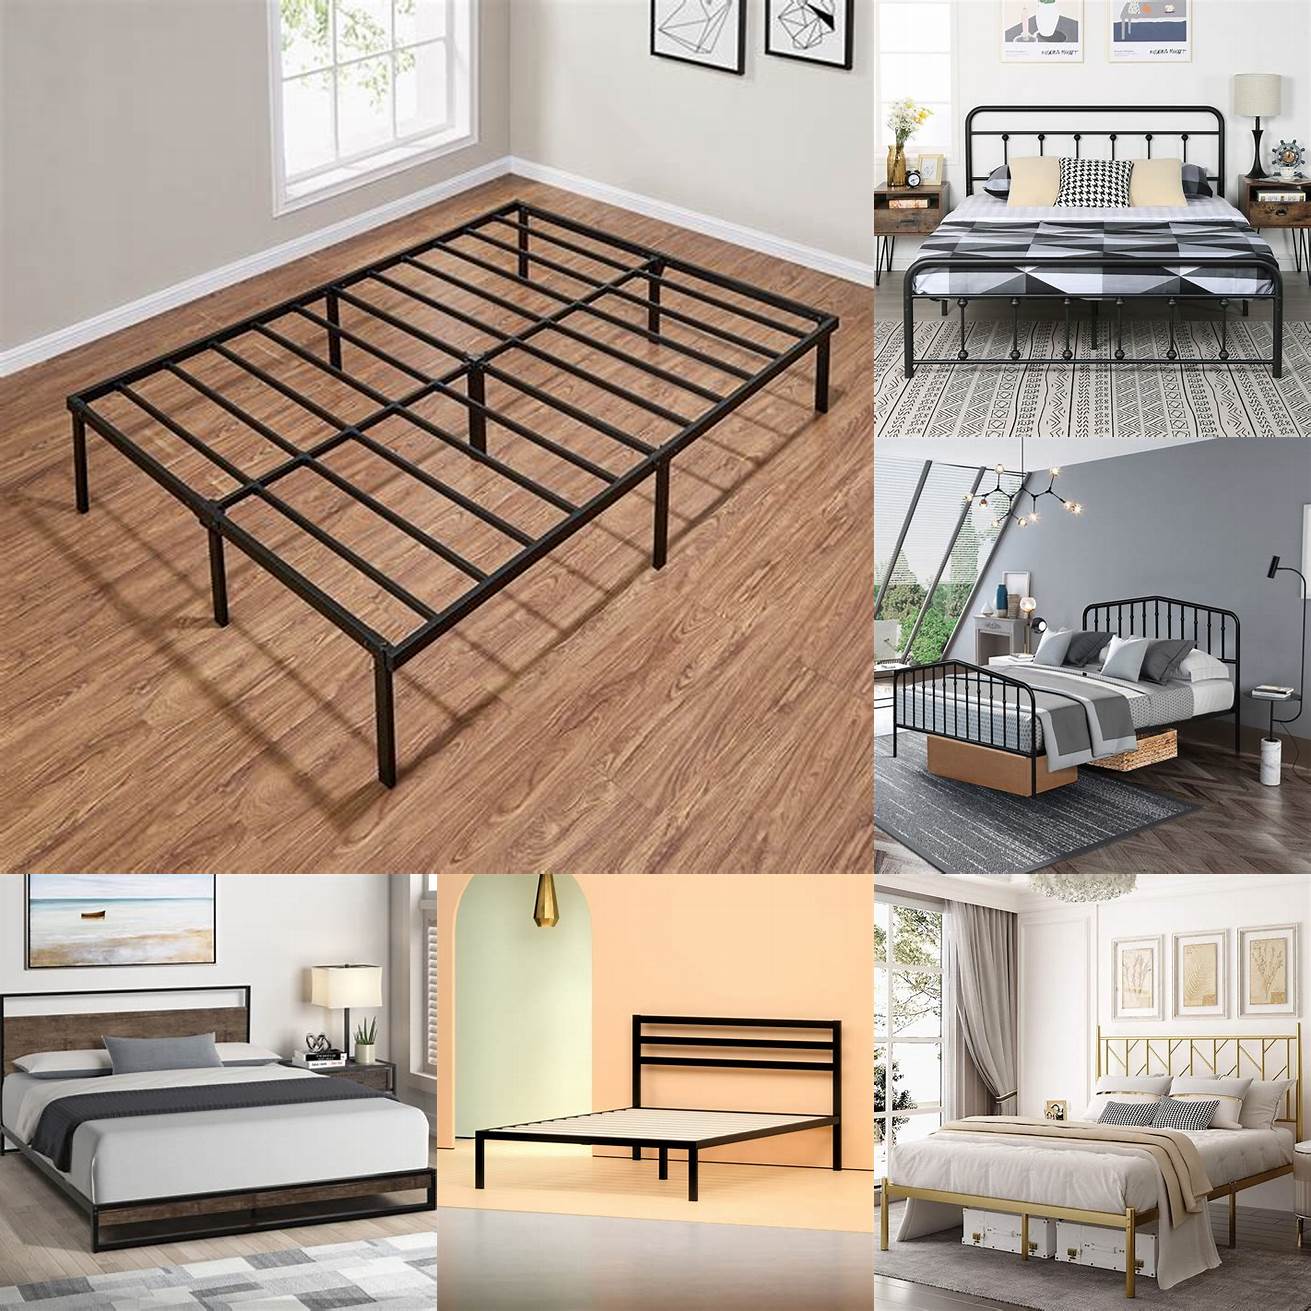 A queen bed platform with a metal frame